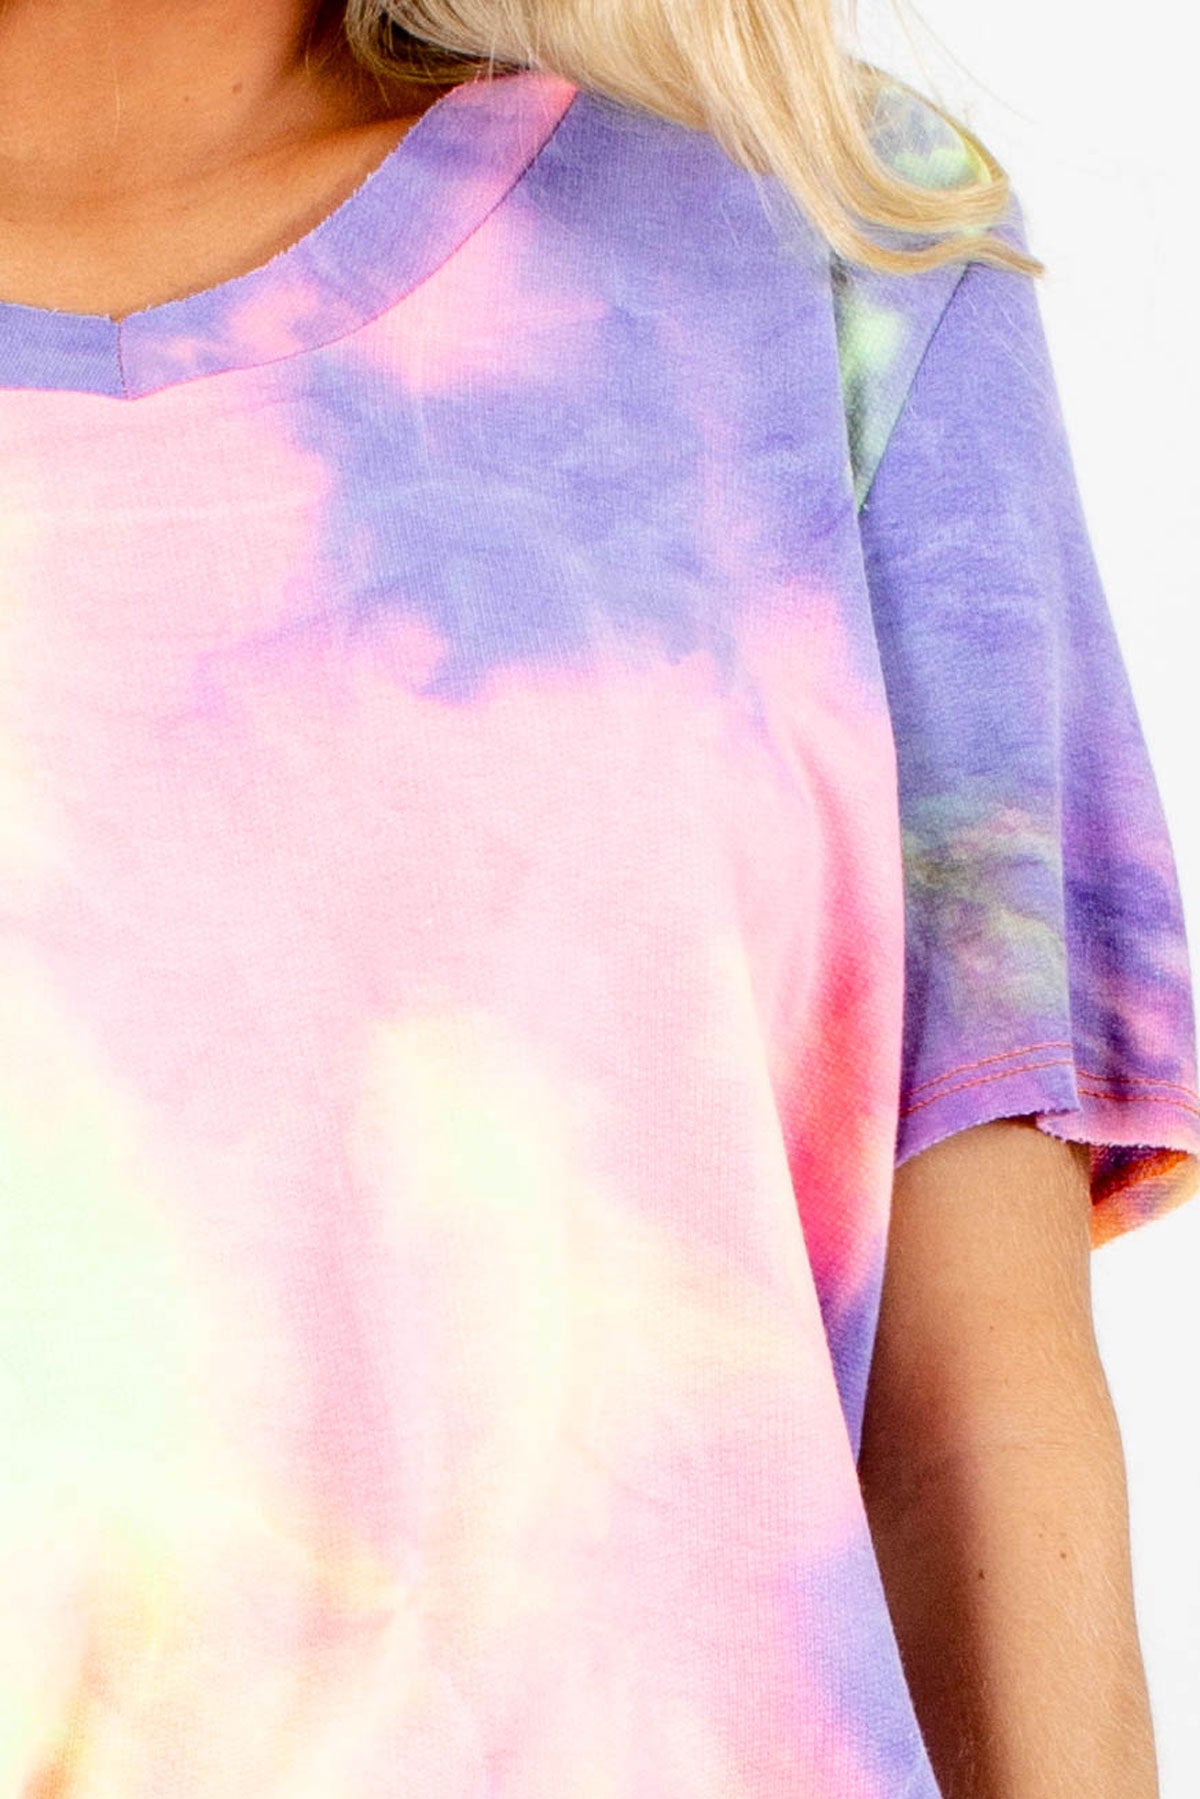 Tie Dye Print on Women's Boutique Top in Pink and Purple.